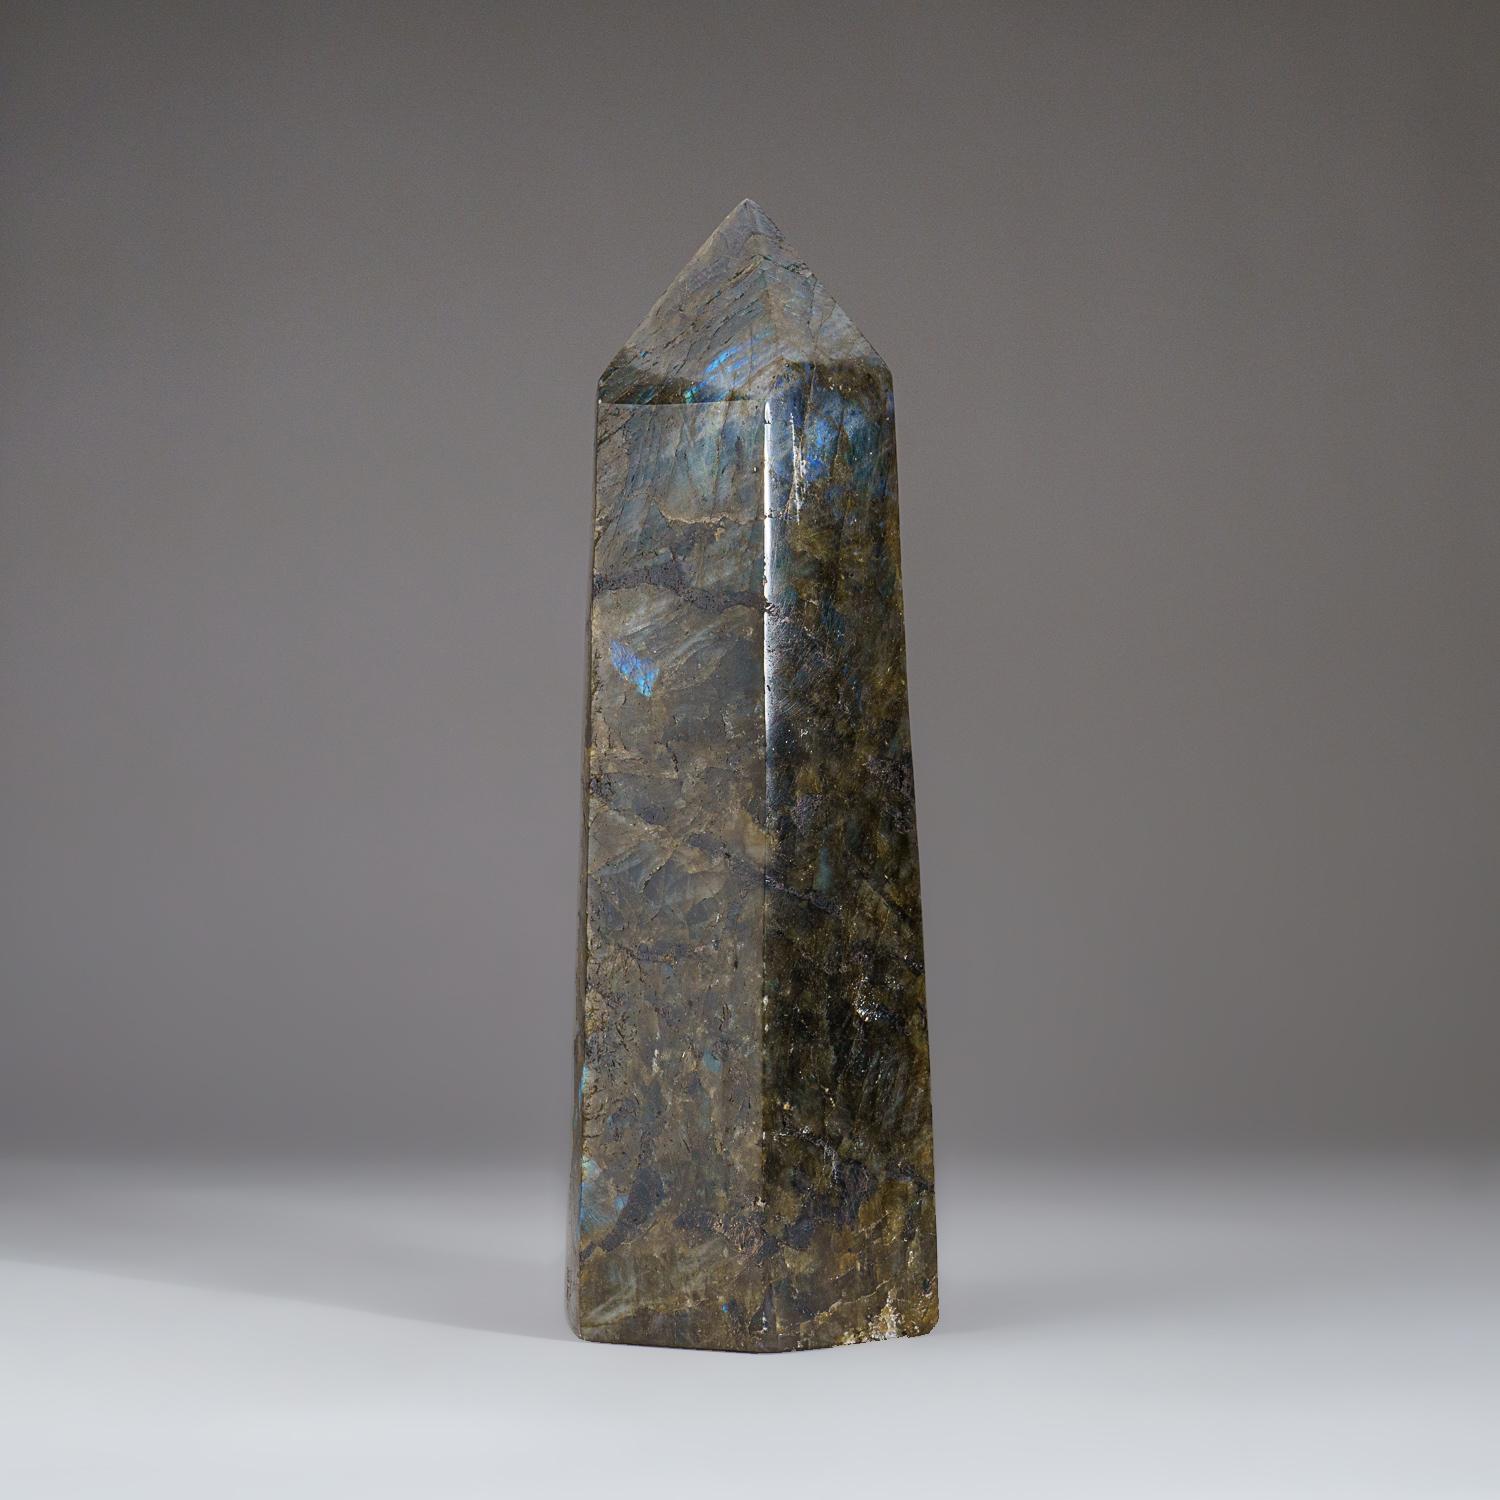 High quality 9.75 inch tall handmade polished Labradorite Obelisk from Madagascar. It has beautiful iridescent play of colors of blue, yellow and red which is caused by internal fractures in the mineral that reflect light back and forth, dispersing